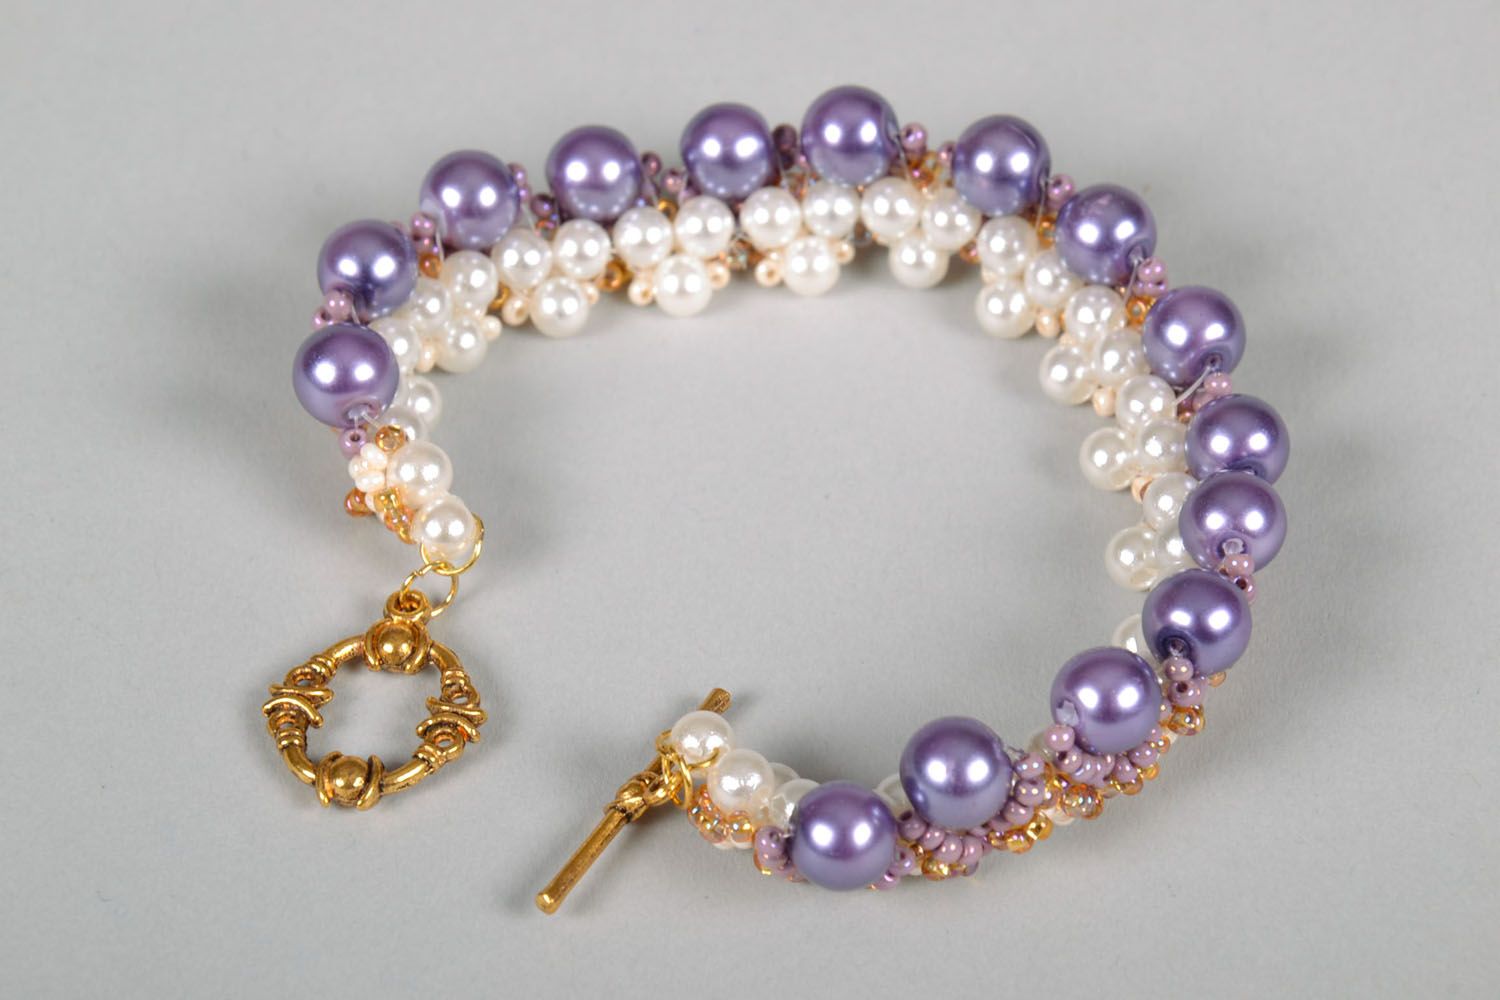 Bracelet made of beads and artificial pearls photo 3